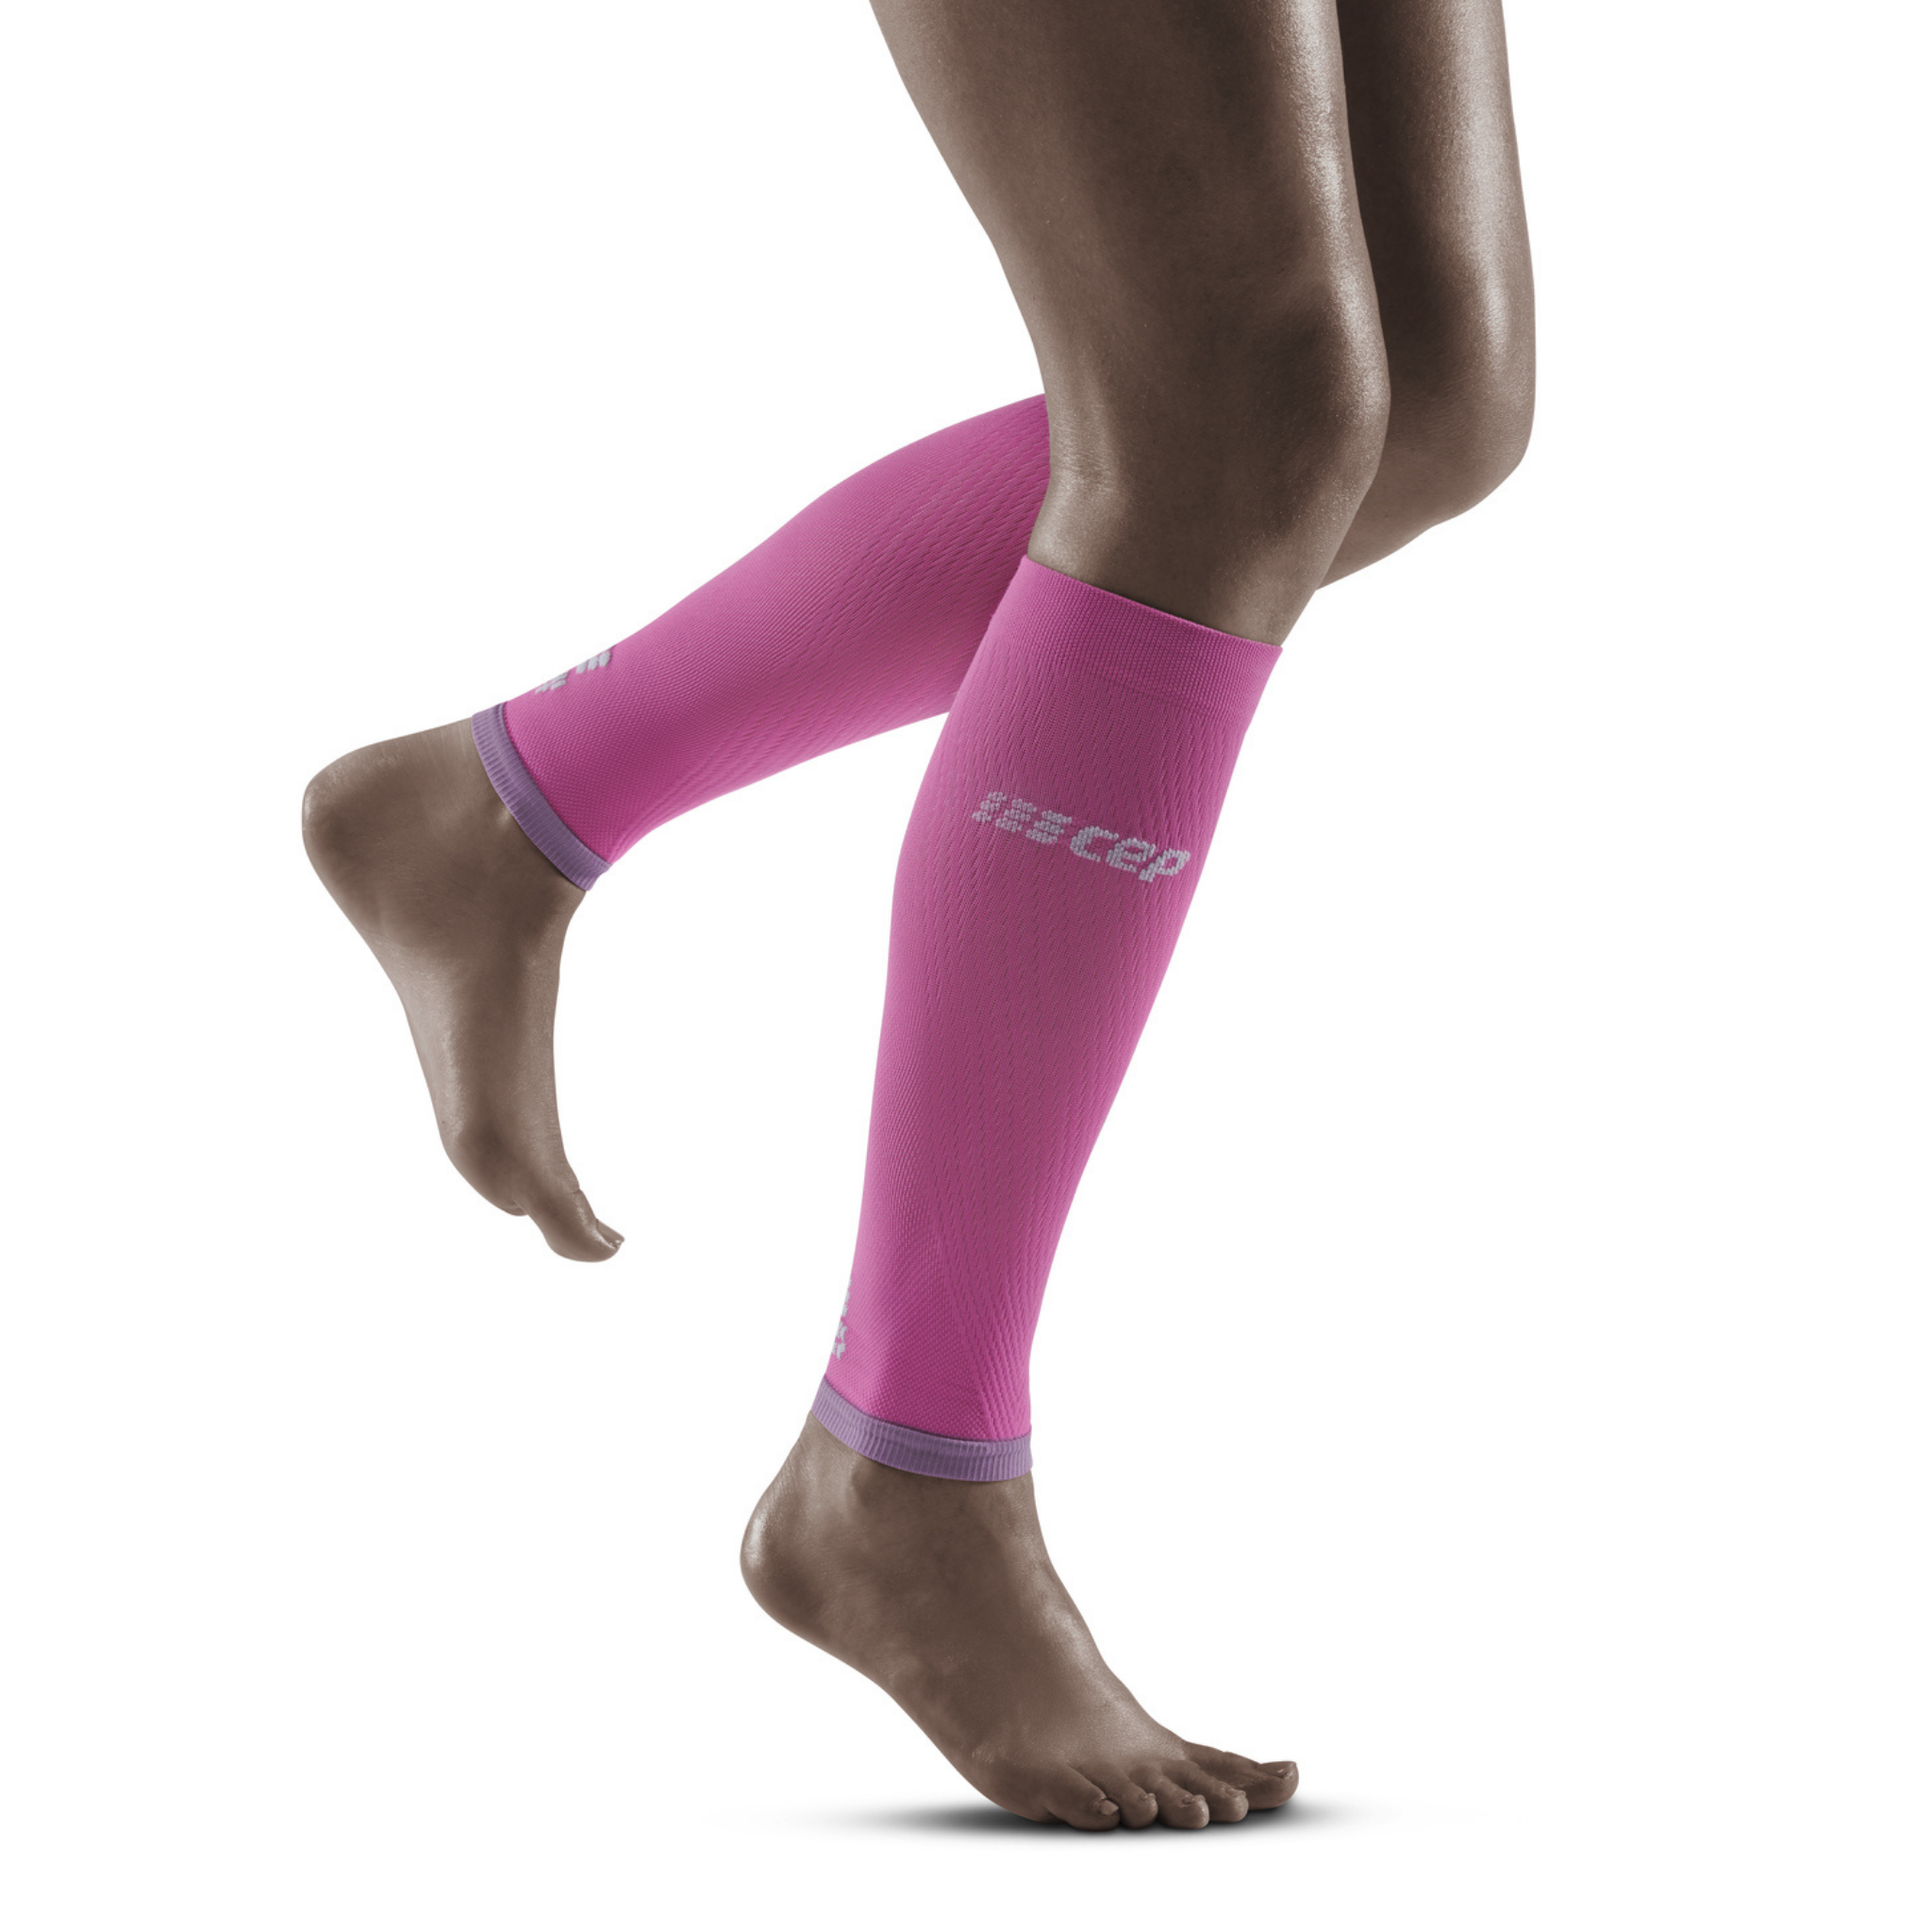  CEP Womens Calf Compression Sleeves Running 2.0 (Lime/Pink),  15.5-17.5 Inch : Health & Household